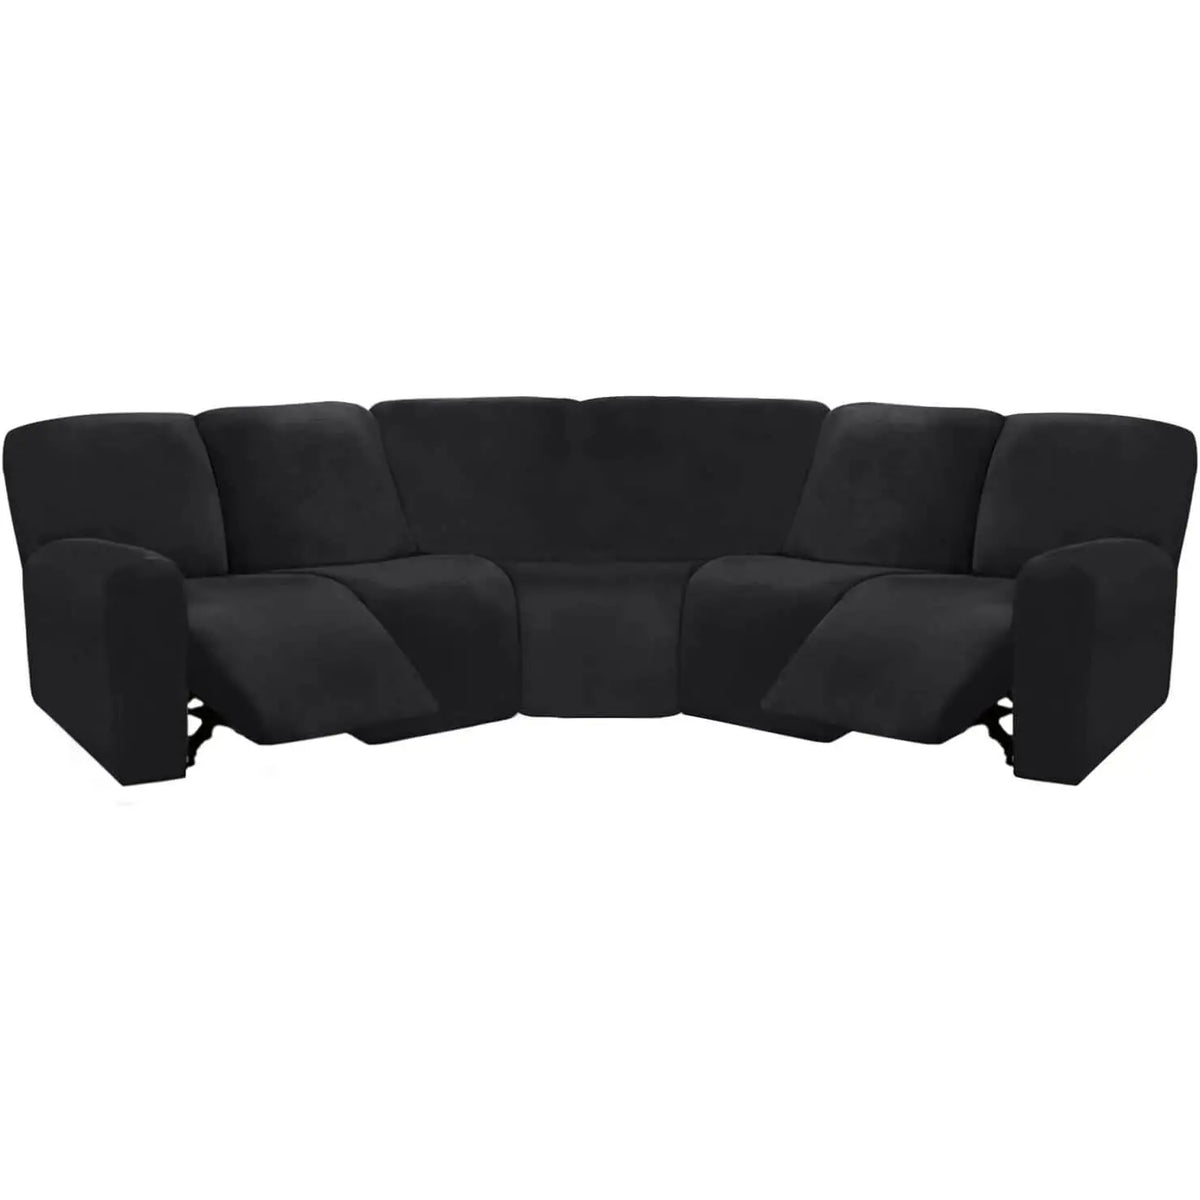 Crfatop 5-seater L Shape Sofa Cover with Recliner Black